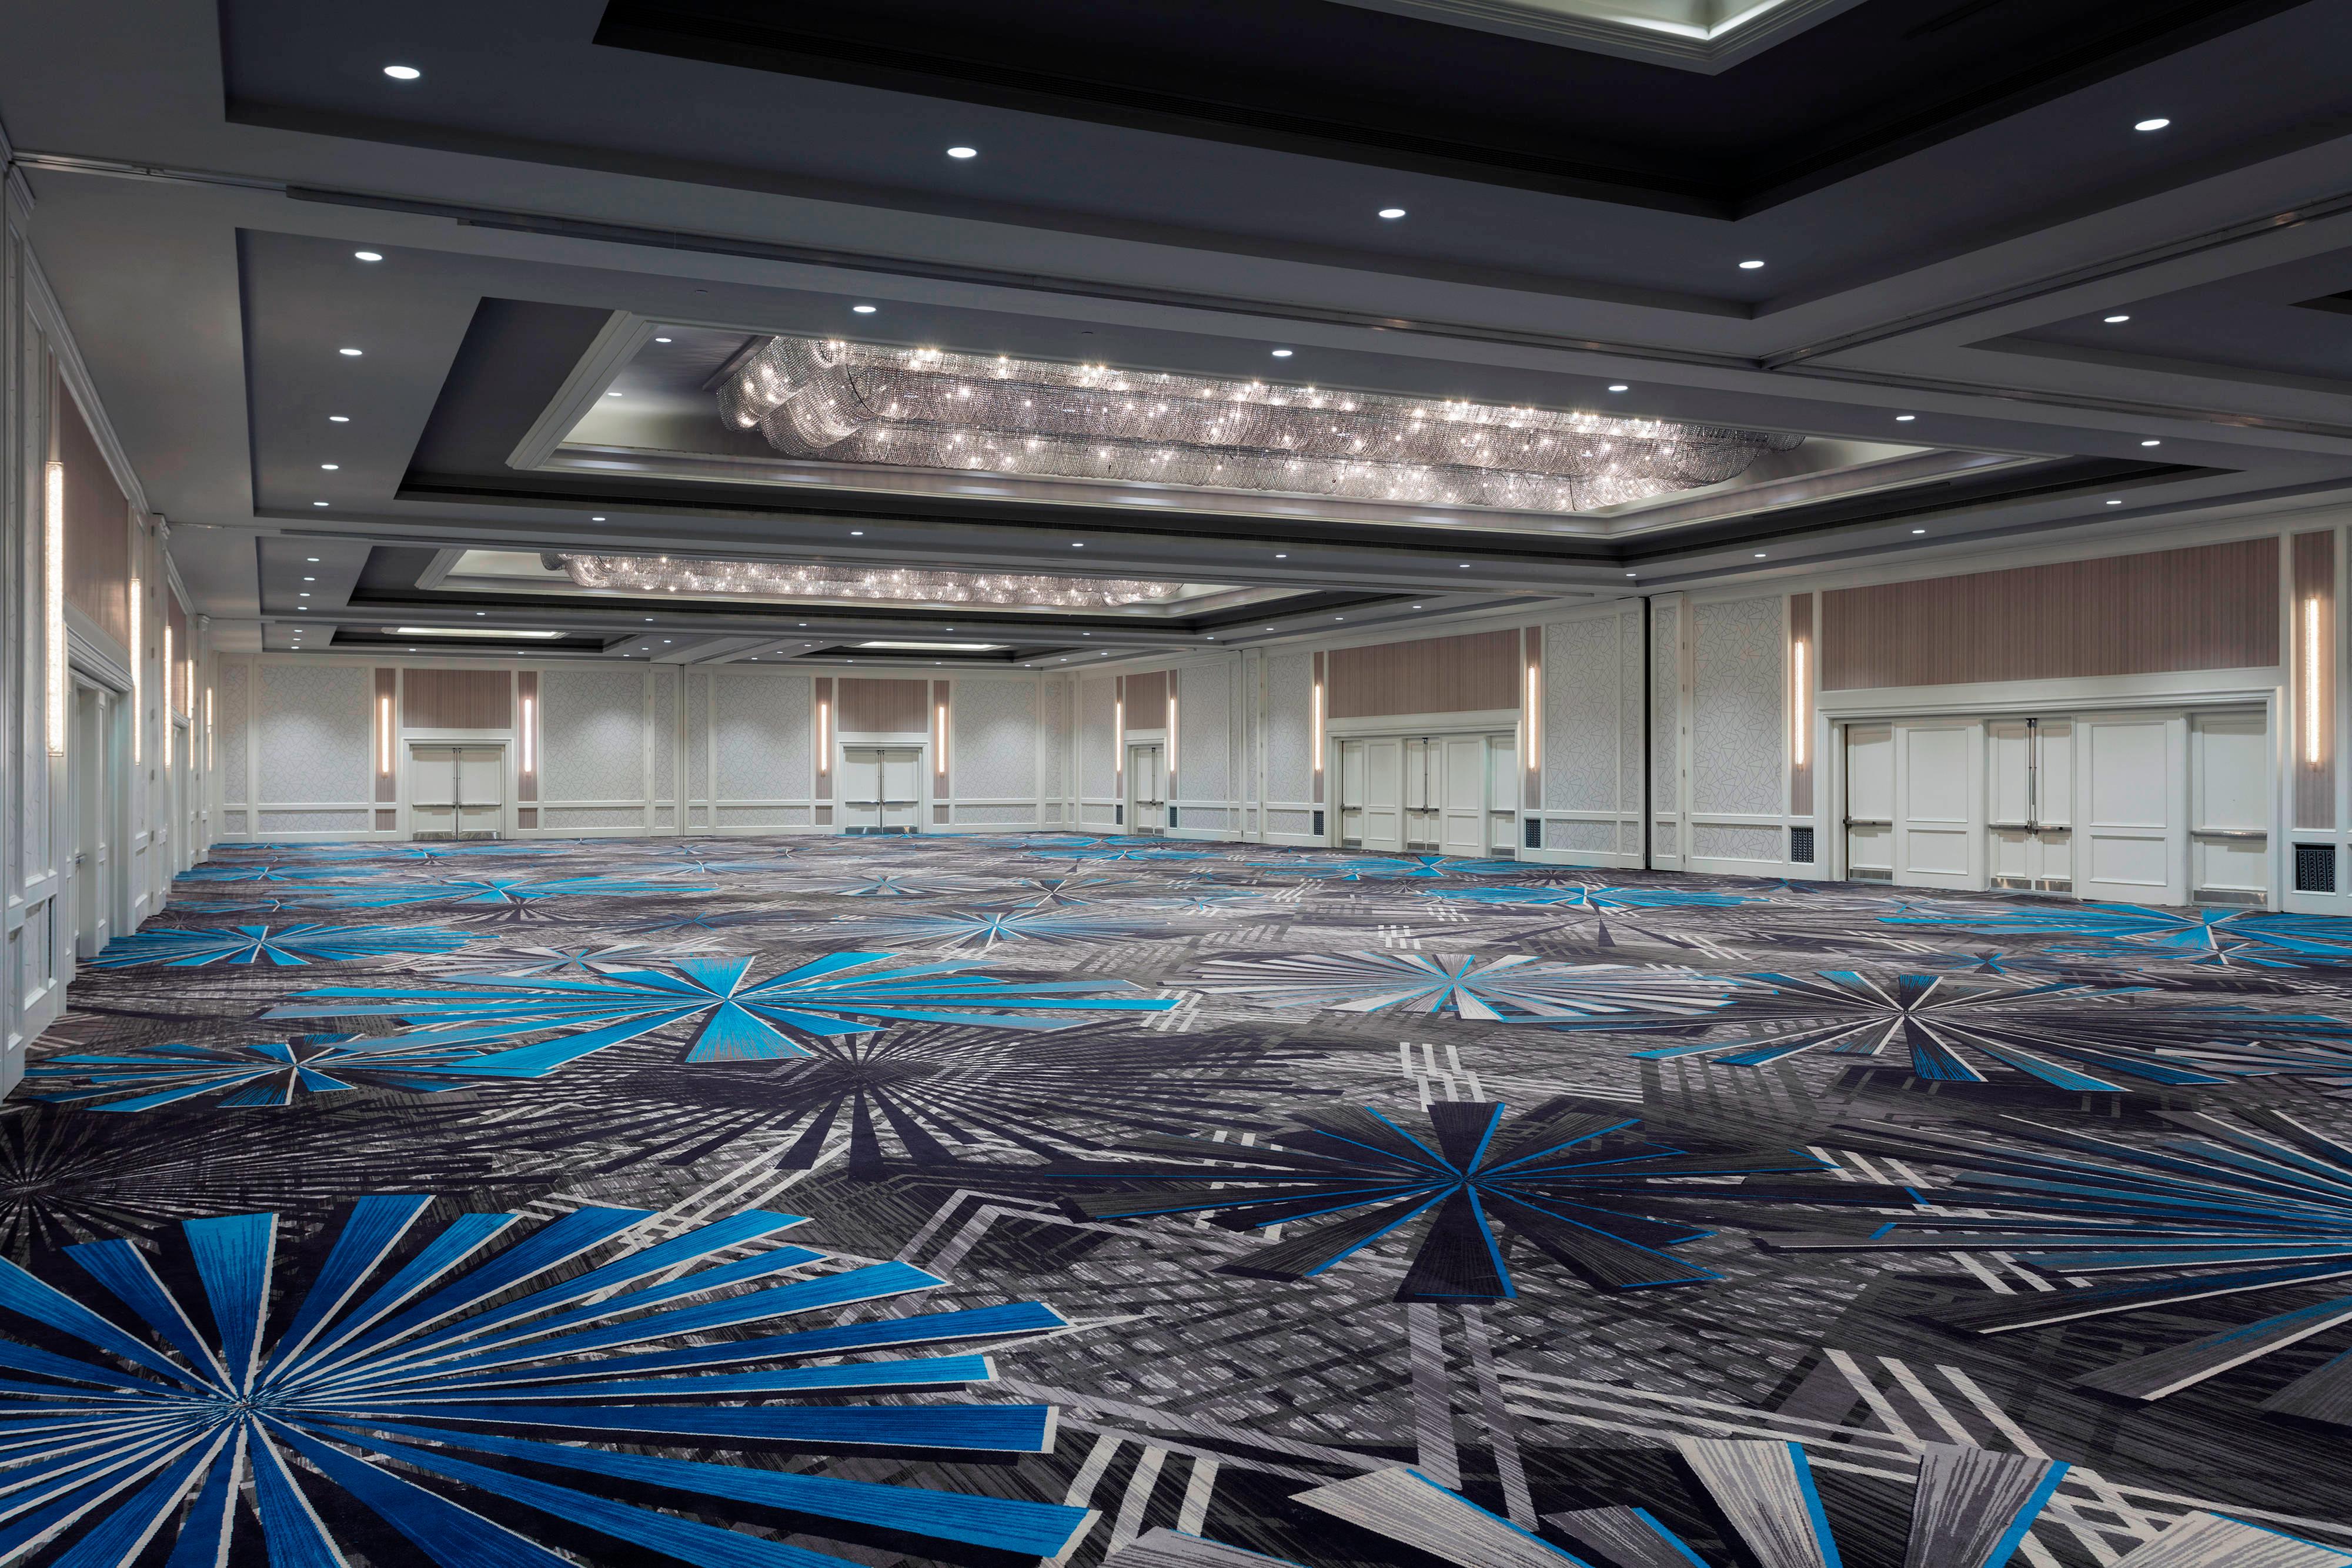 Large ballroom with blue-and-gray geometric starburst patterned carpet